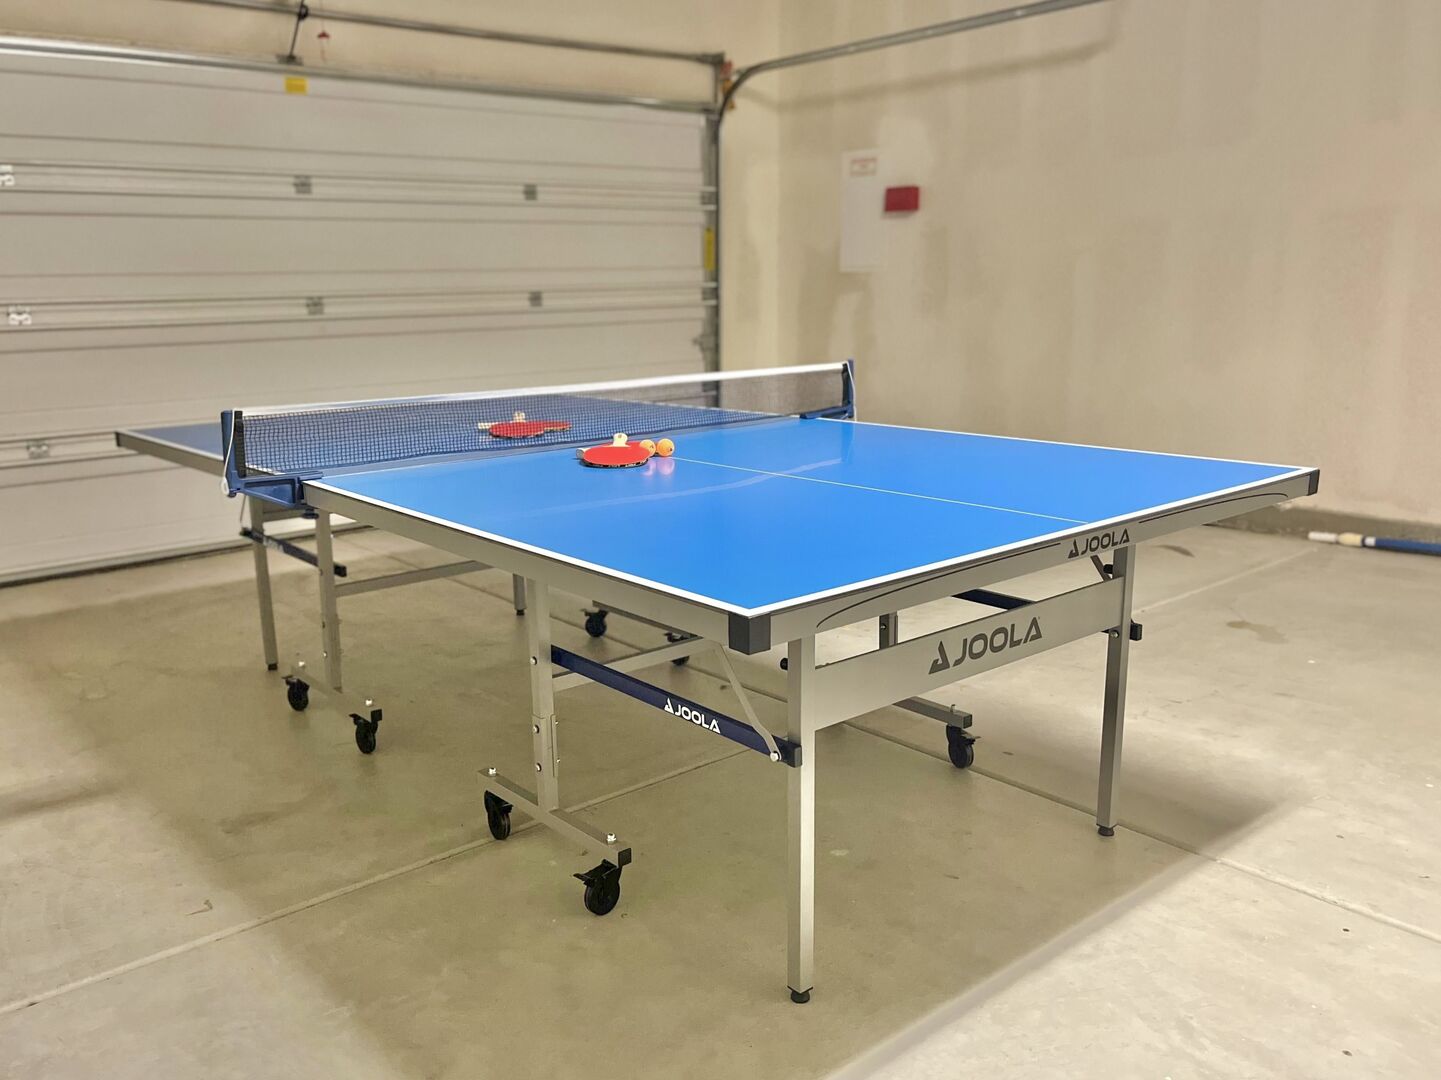 Practice your skills with a friend on the ping pong table.